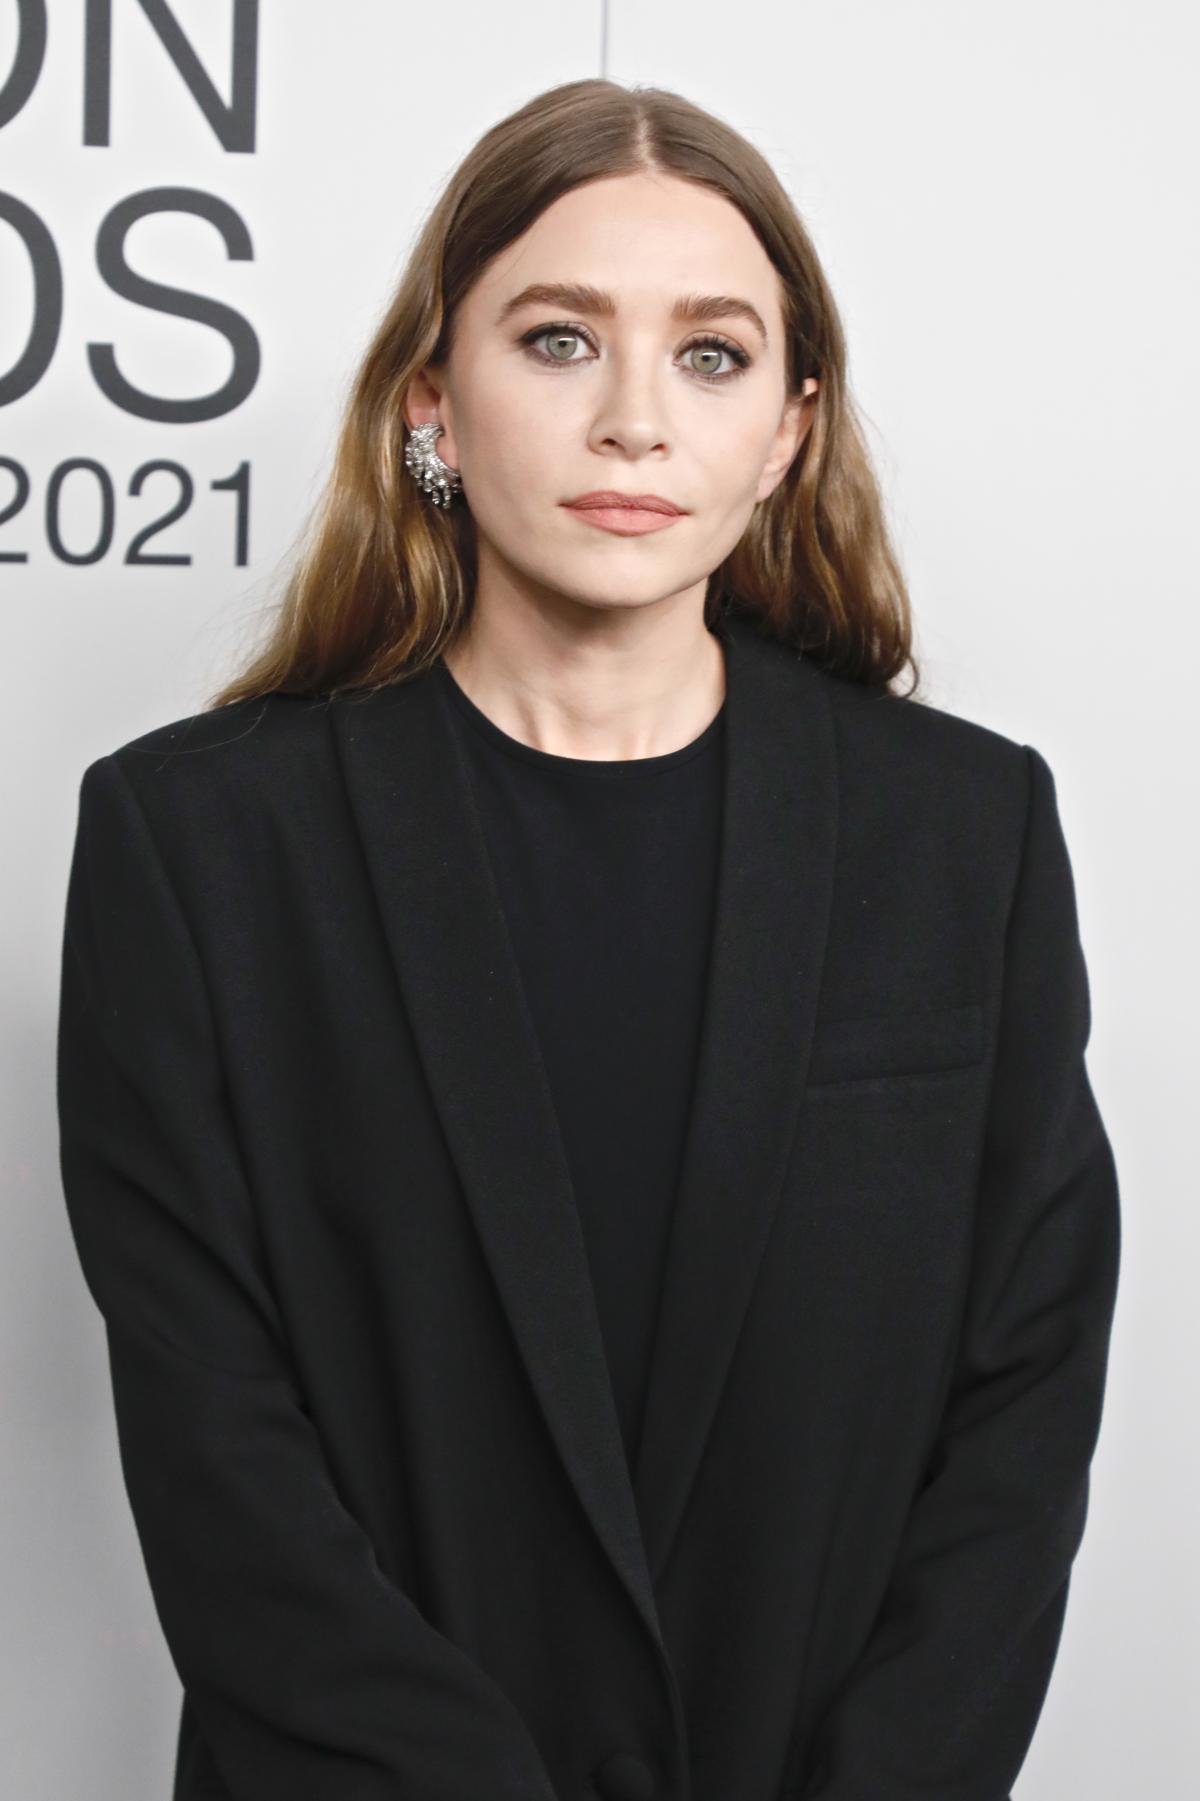 Ashley Olsen and Husband Louis Eisner 'Thrilled' to Welcome 1st Baby